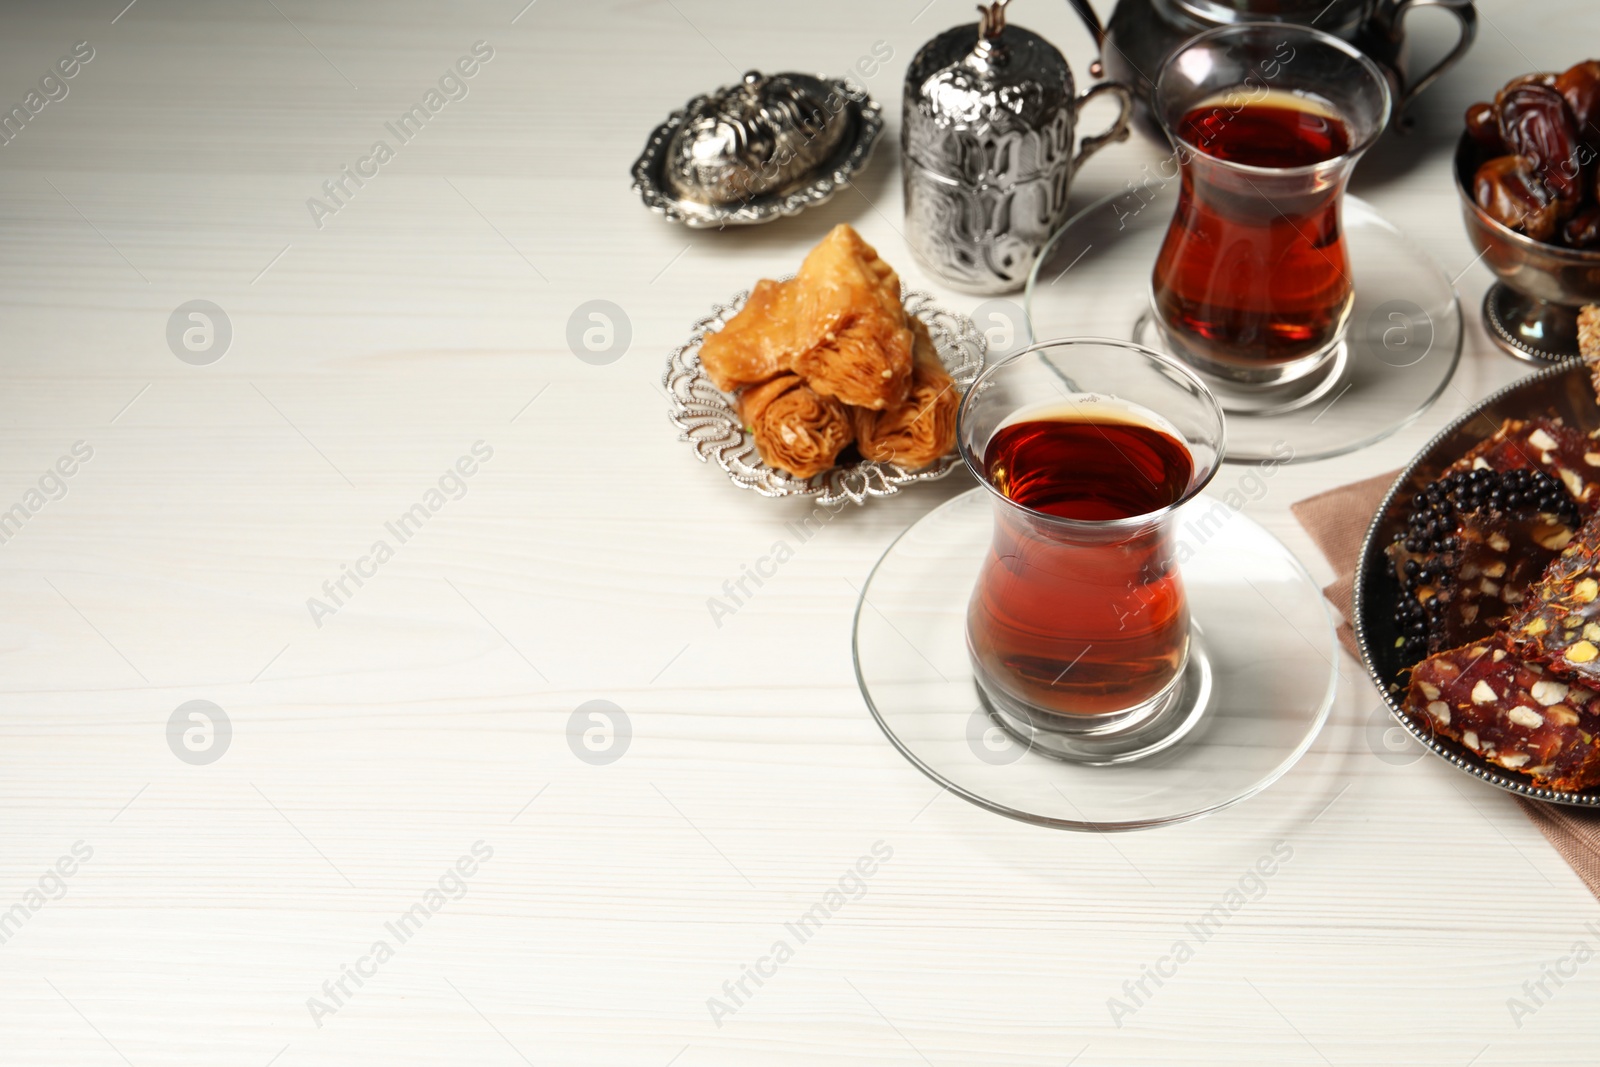 Photo of Glasses of tea, baklava dessert, Turkish delight and date fruits served in vintage tea set on white wooden table, space for text